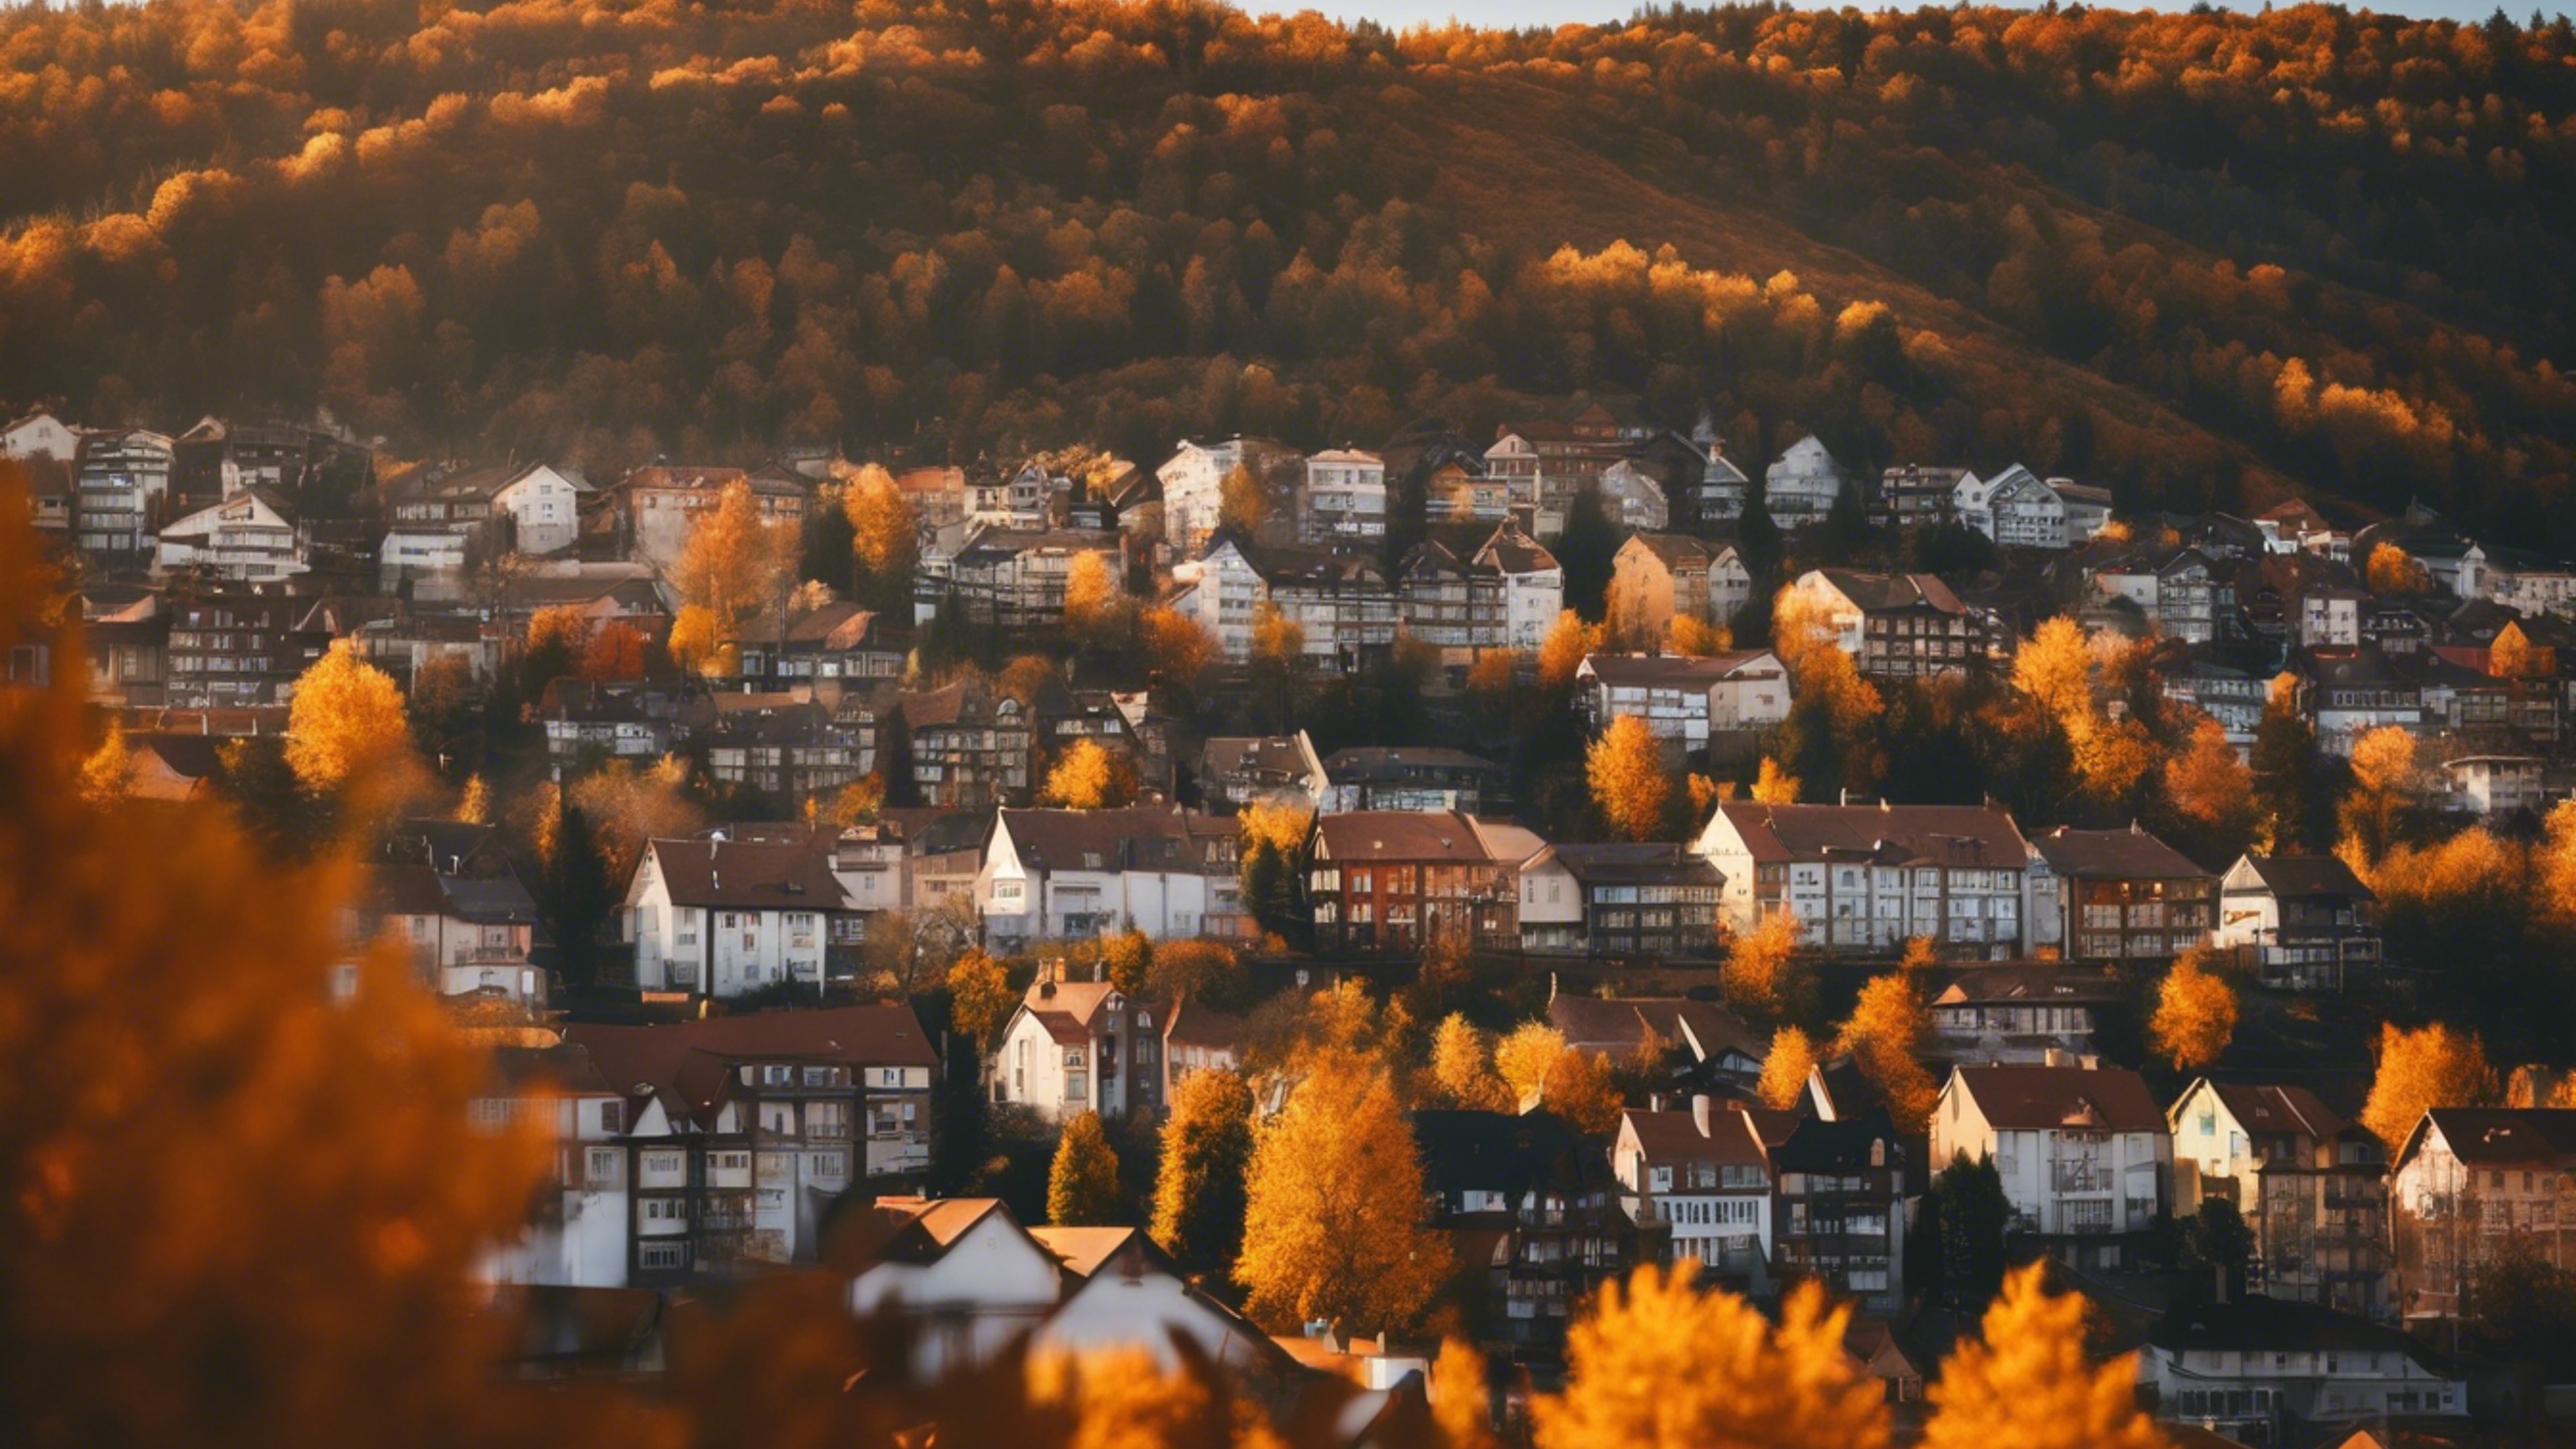 A calm skyline view of a mountain town in autumn, dappled in hues of orange and gold. Tapet[cb2d4b5eada64efeb989]